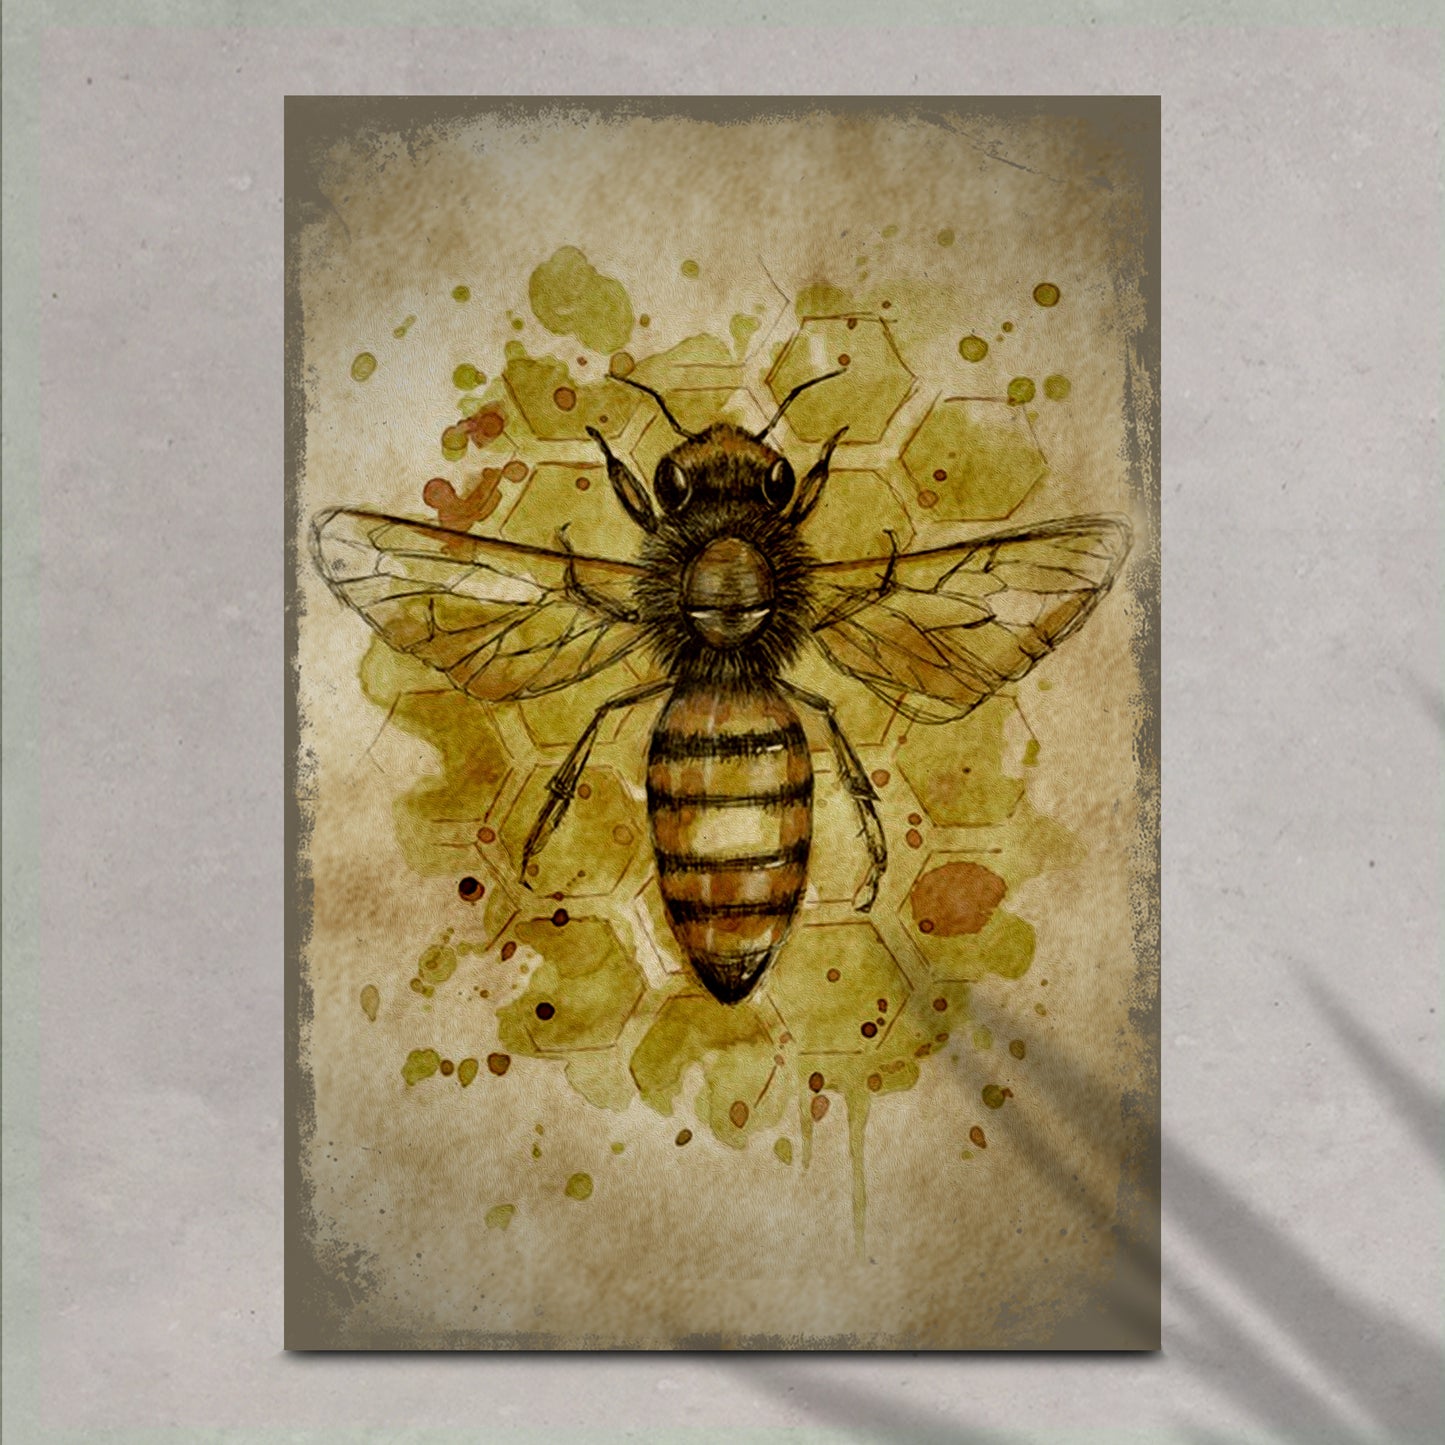 Rustic Queen Bee Canvas Wall Art - Image by Tailored Canvases